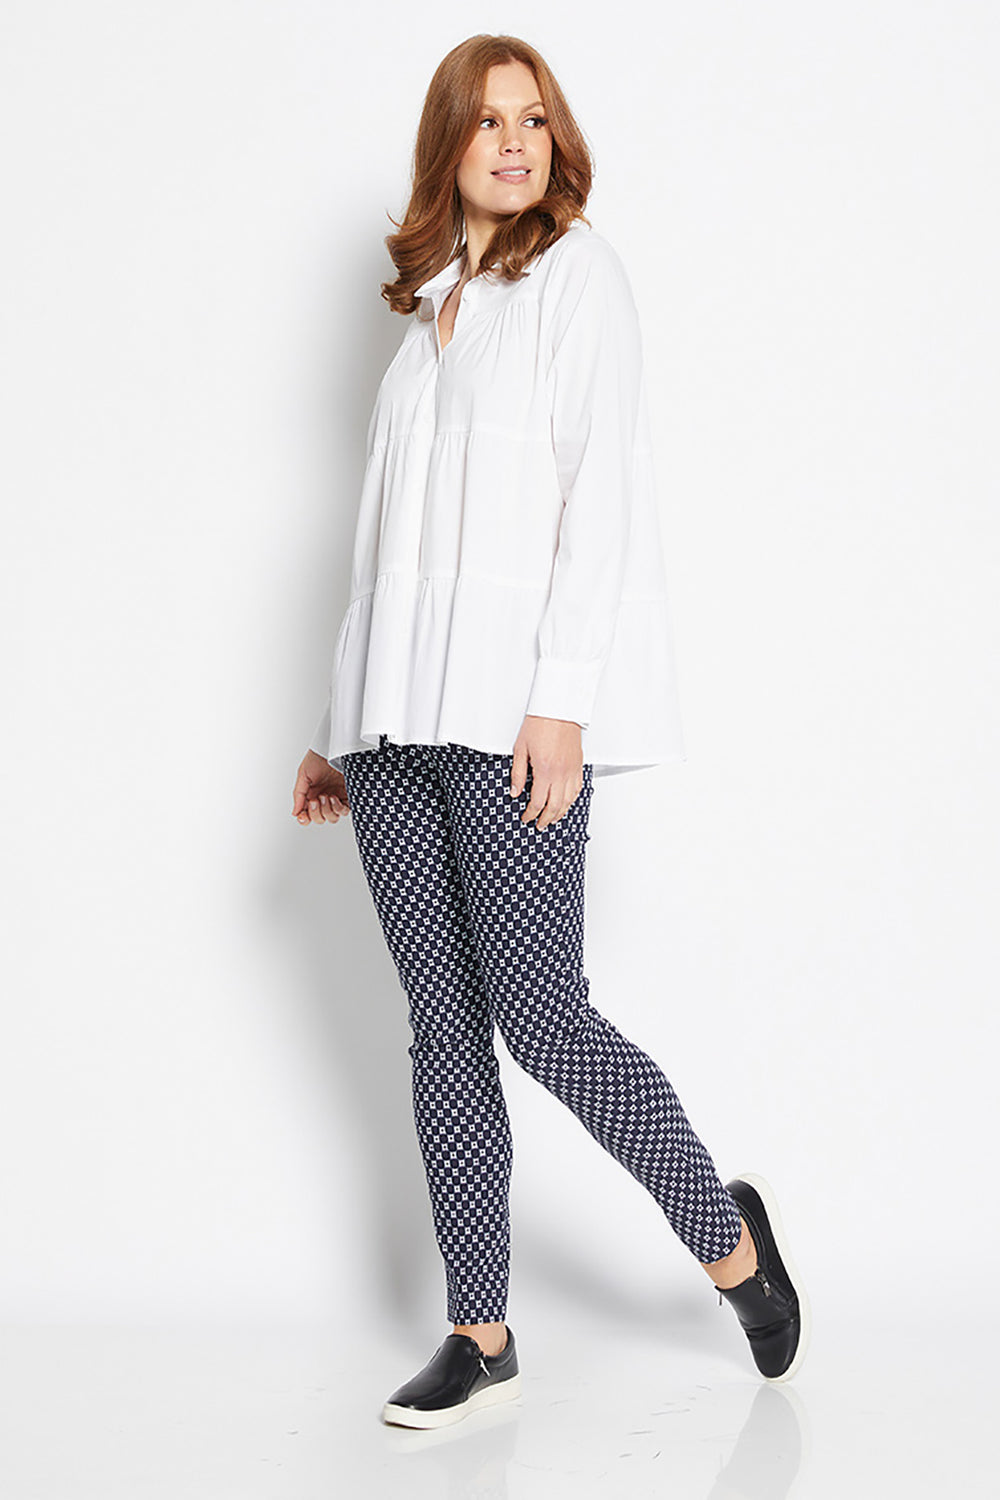 orbit simple pant by Philosophy and white shirt